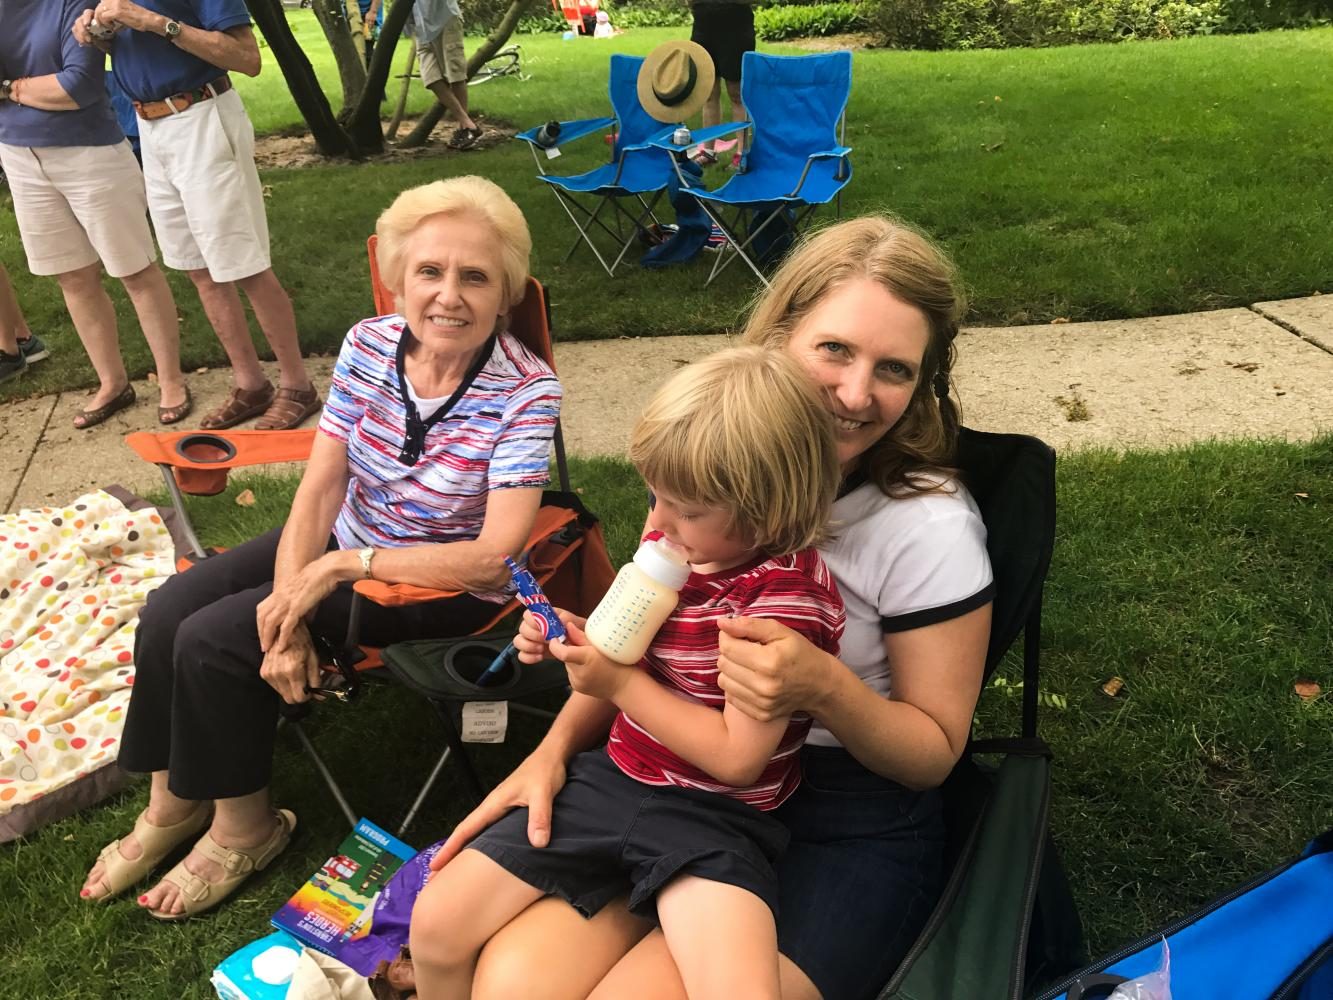 Karen Gliwa enjoys the parade with her 3-year-old son and her mother. “Fourth of July to me is about family and independence,” she said.